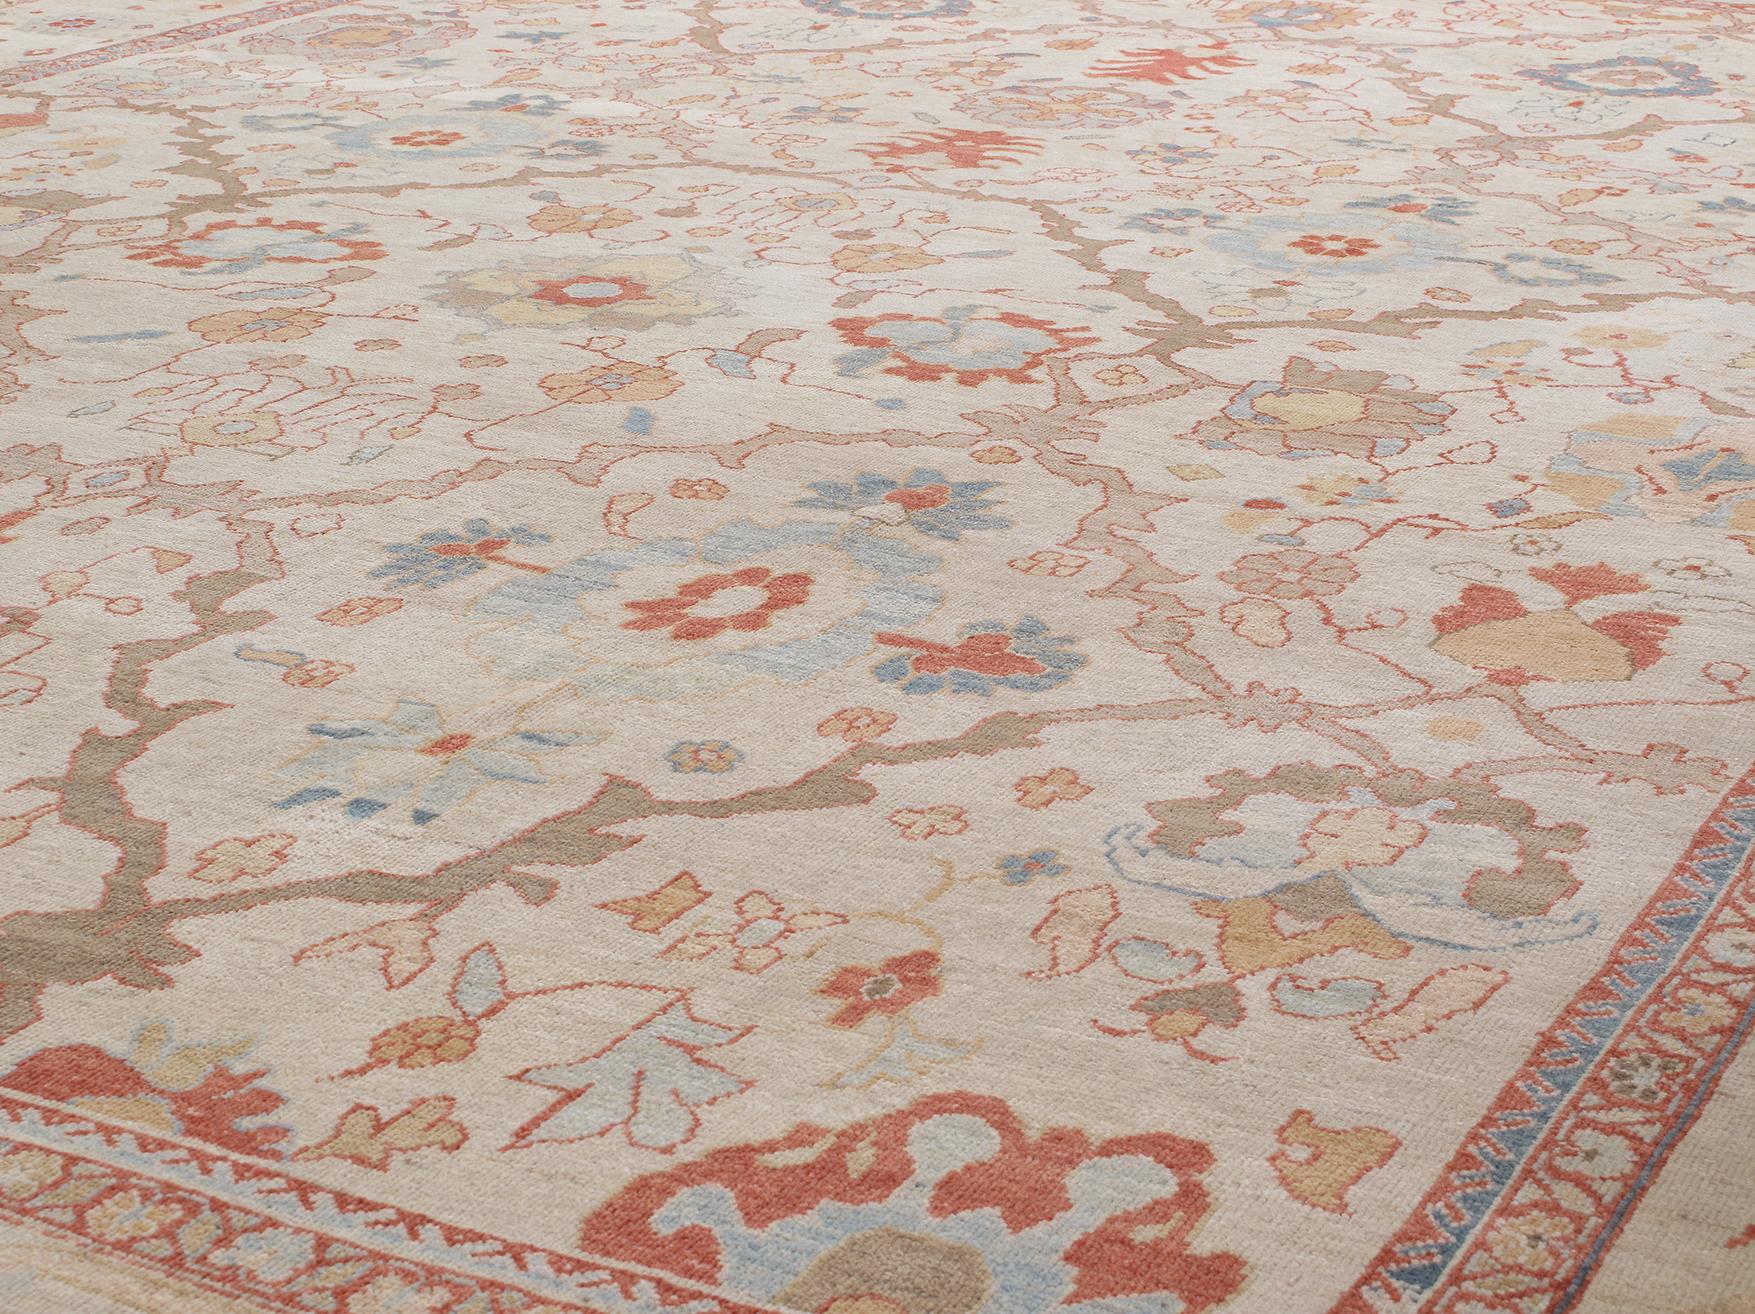 Made in Iran, this rug relates to the Zieglar Sultanabad collection, in 1875 the Anglo-Swiss company, Zieglar and Co. produced carpets in the Western region of Persia. They married tradition with innovation by employing designers from New York and